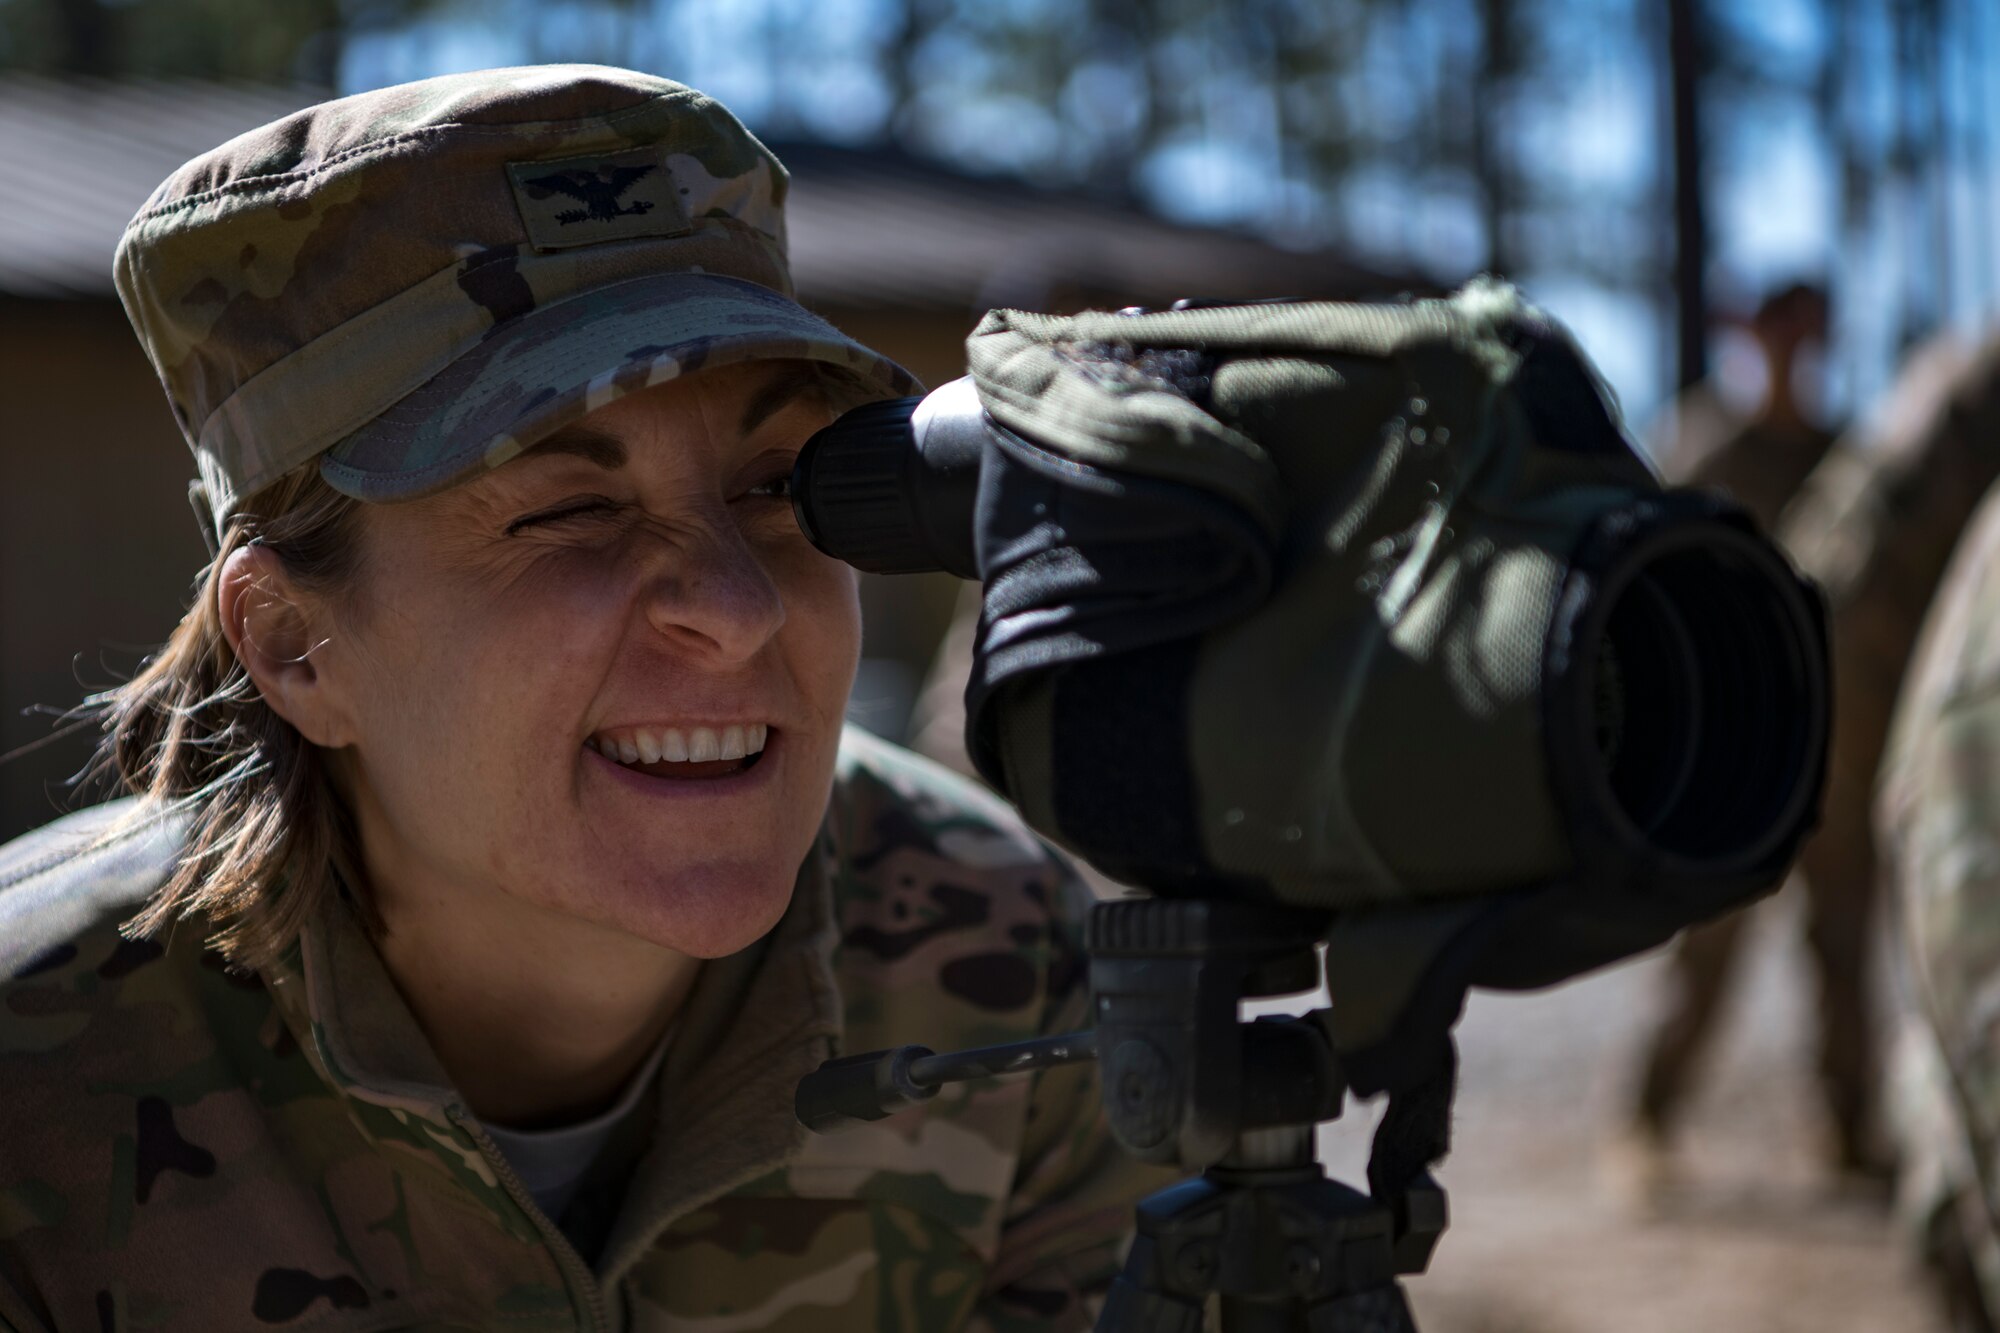 Col. Jennifer Short, 23d Wing commander, attempts to spot a hidden member of the 820th Base Defense Group’s Close Precision Engagement Team during a capabilities demonstration, Feb. 5, 2018, at Moody Air Force Base, Ga. The immersion was designed to give the 23d Wing’s leadership a better understanding of the 820th BDG’s mission, capabilities and training needs. (U.S. Air Force photo by Senior Airman Daniel Snider)